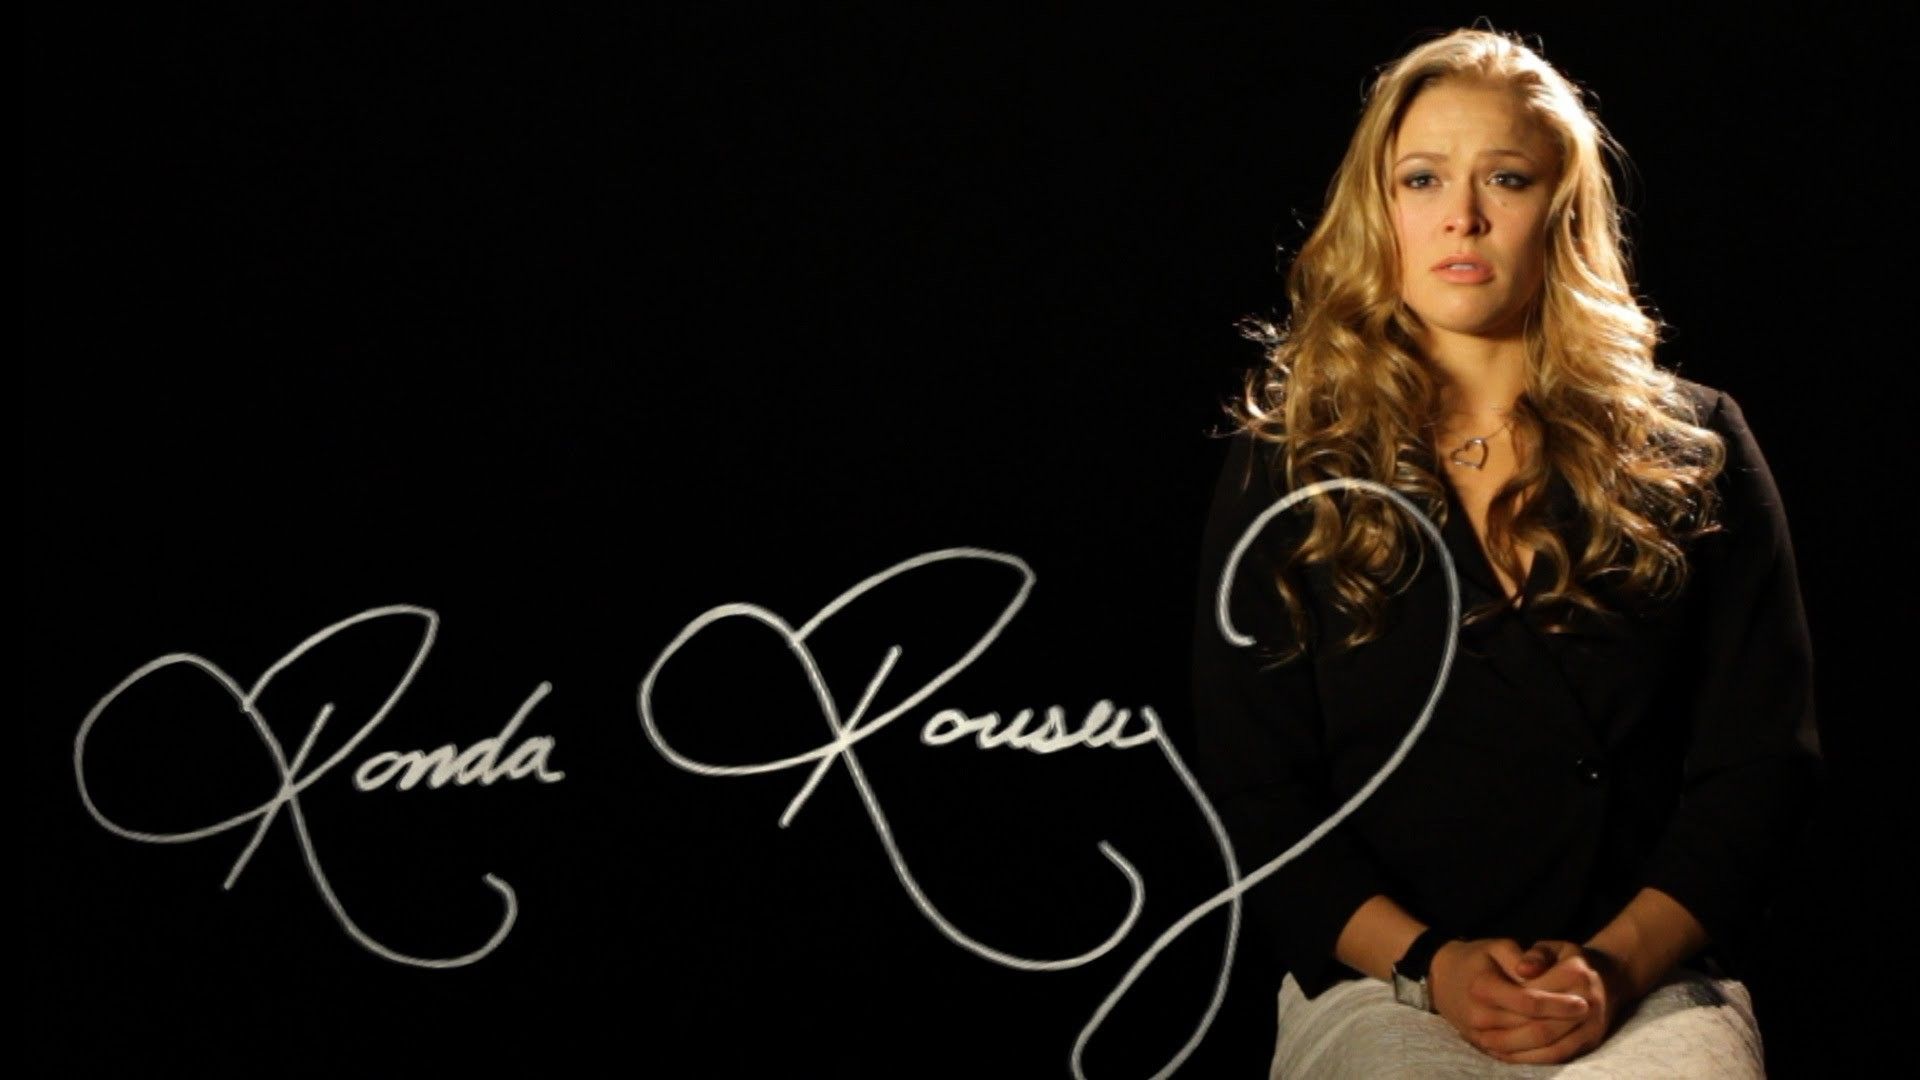 Ronda Rousey Wallpaper Android